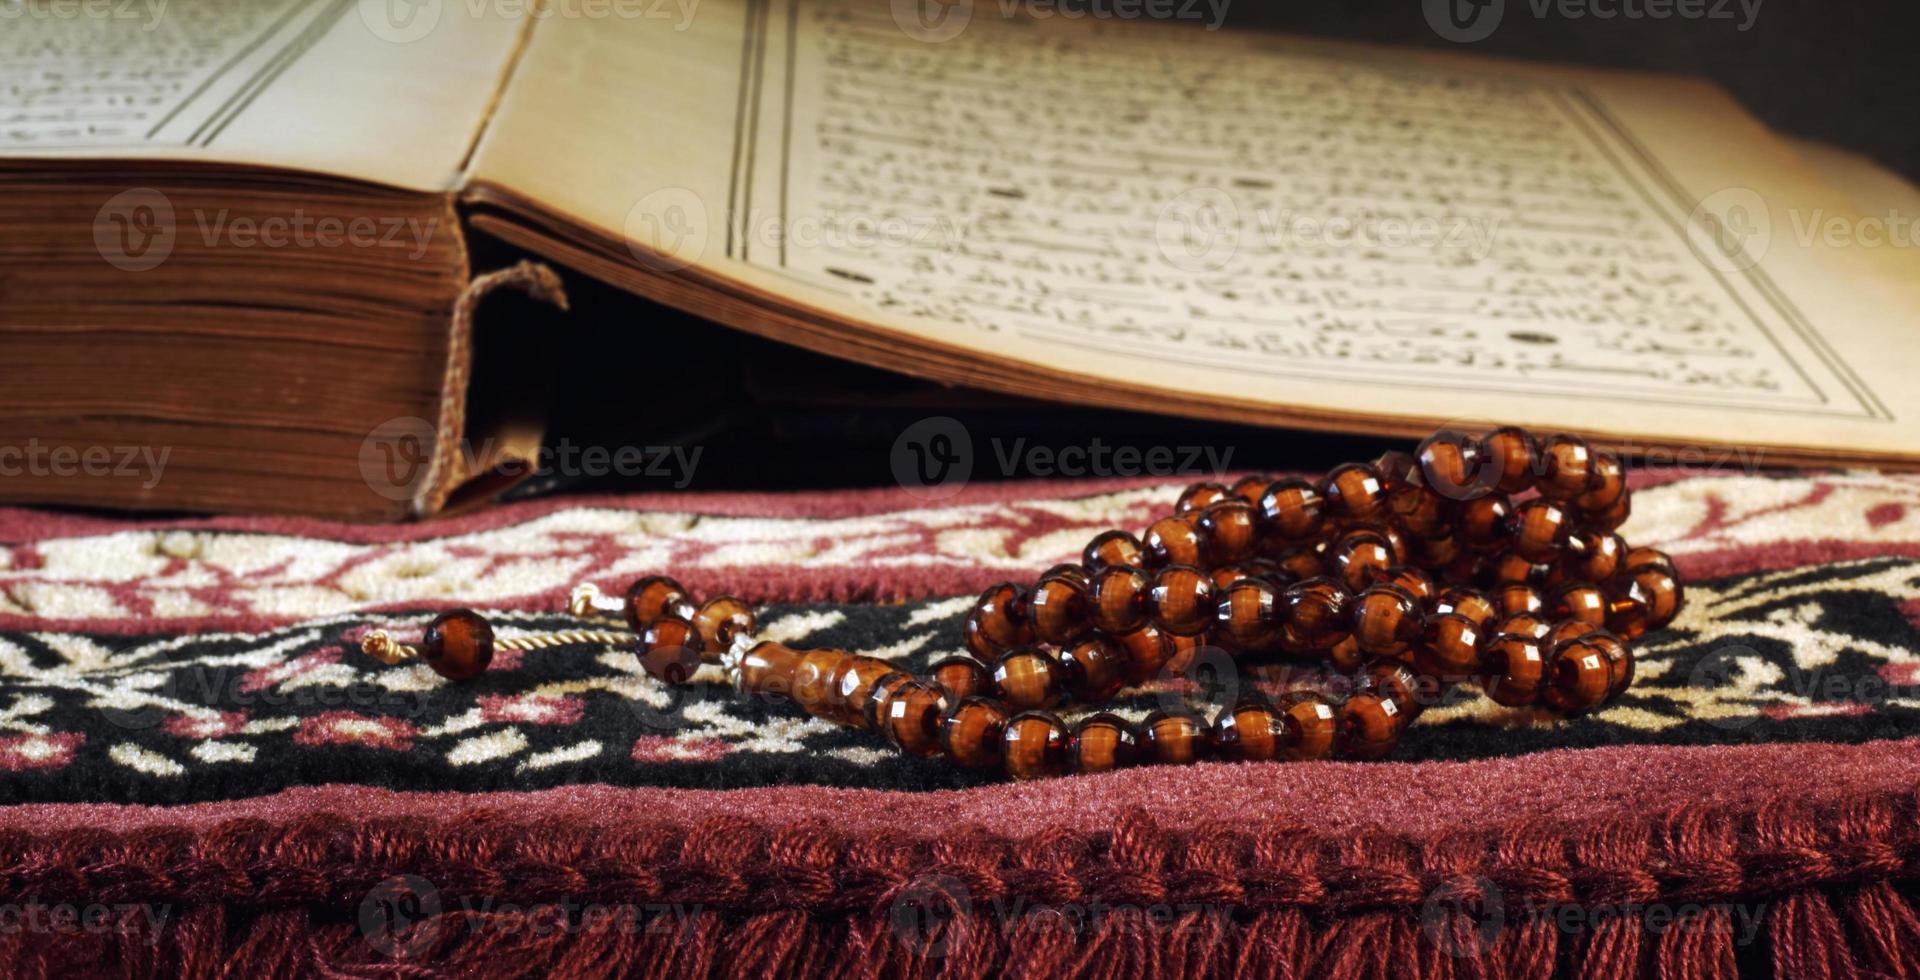 Quran the holy book of muslim religion and Pray Counting Bead photo